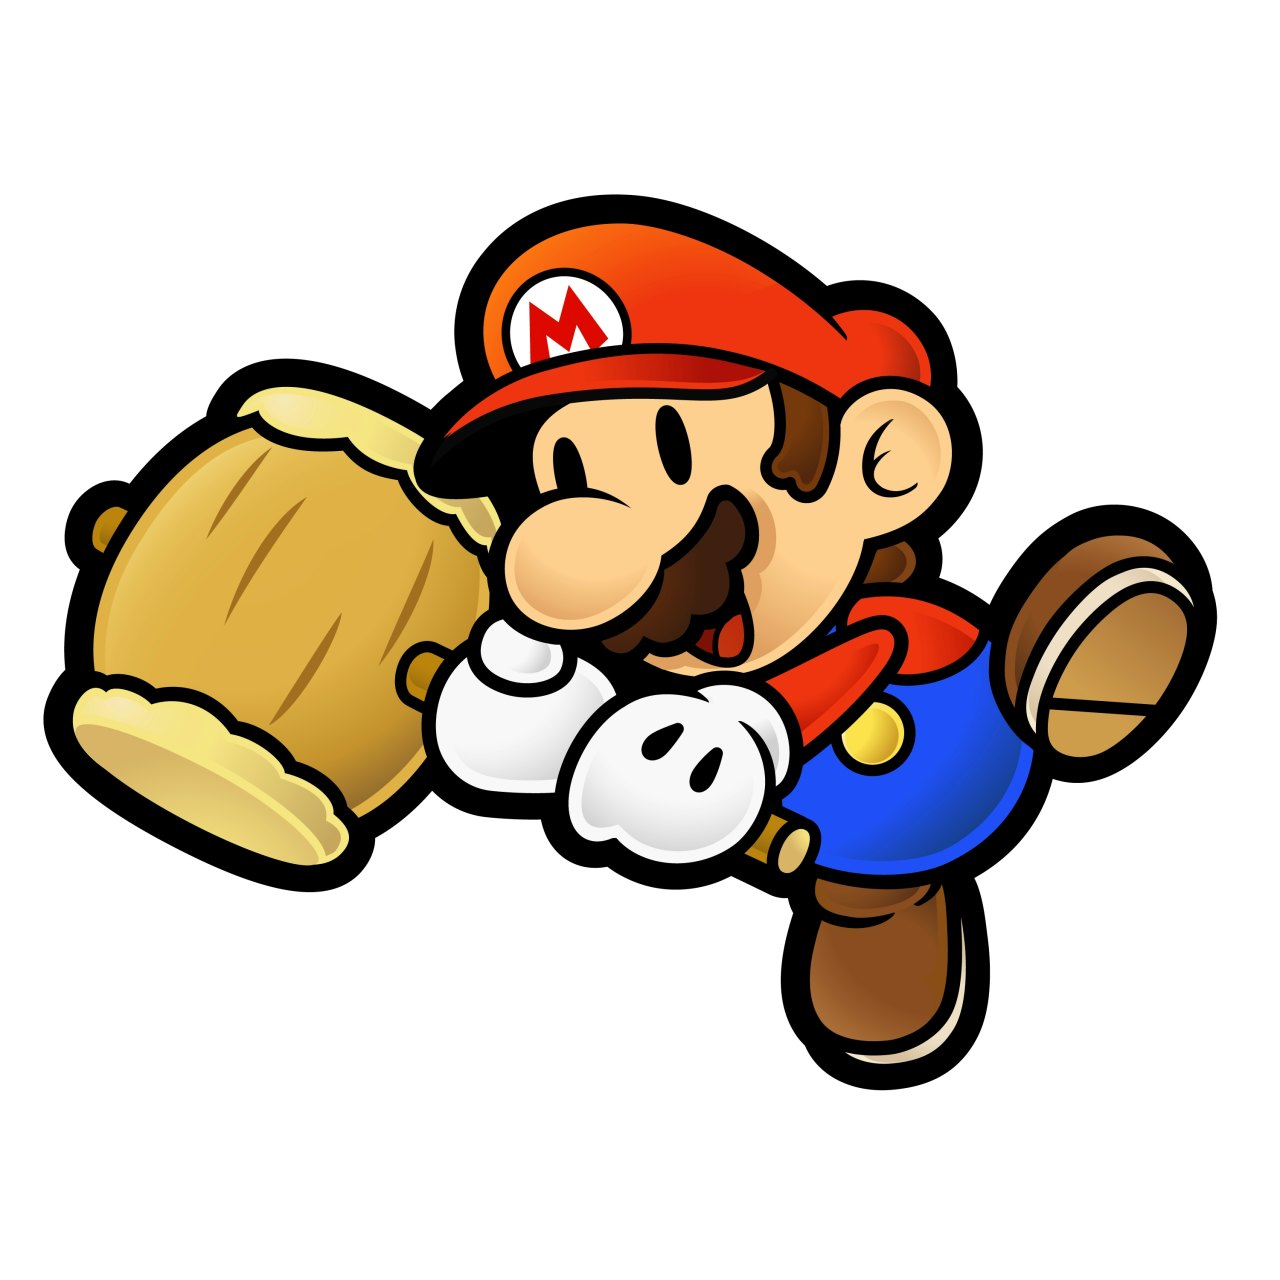 20 Years Later, Nintendo’s Best Paper Mario Game Gets a Stunning Remake